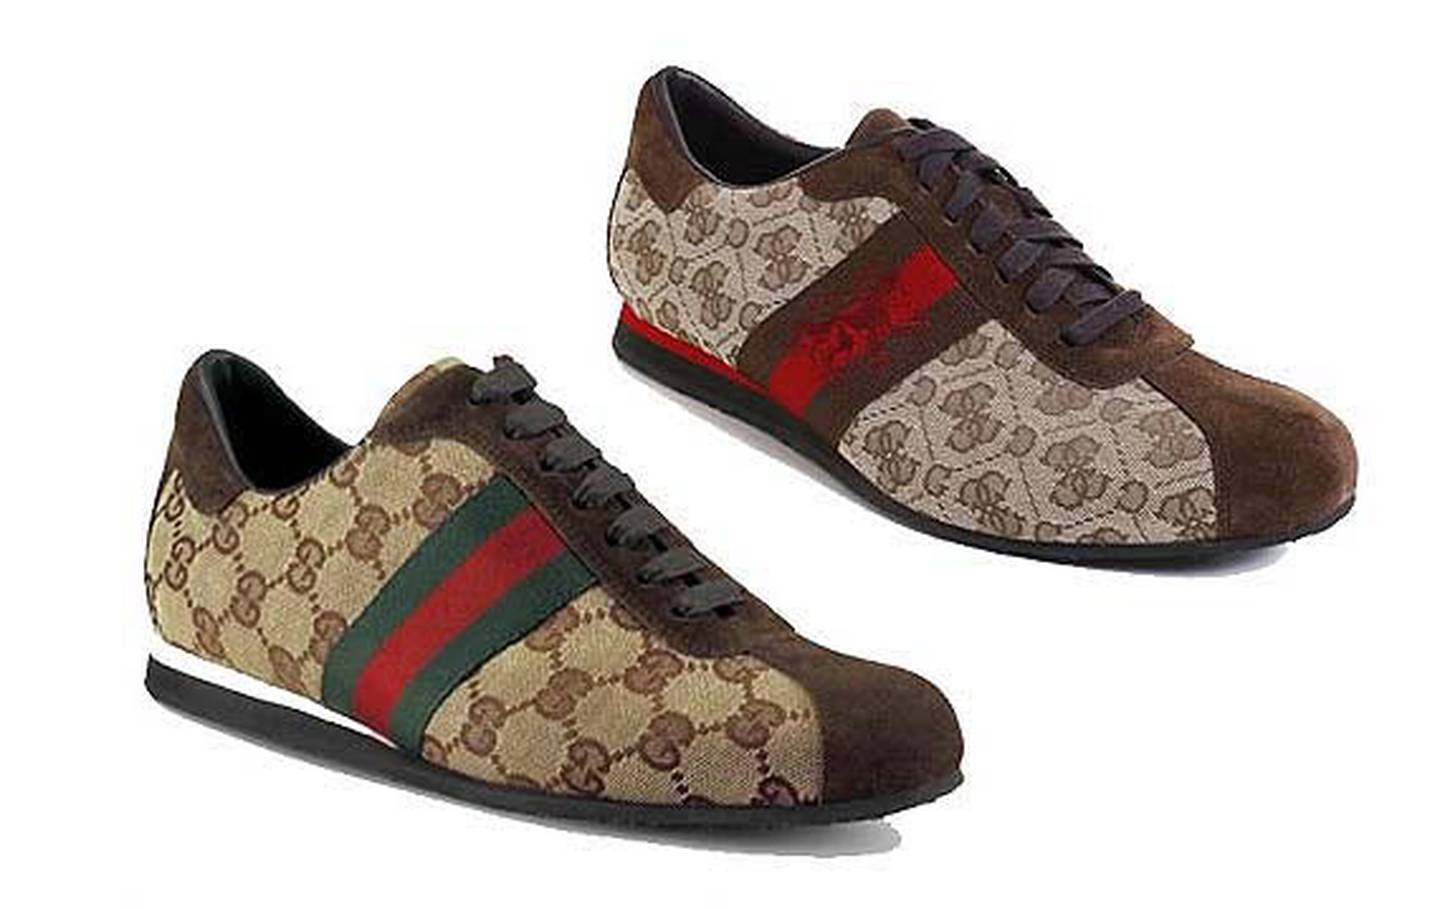 Gucci and Guess End Nine-Year Trademark Dispute | BoF